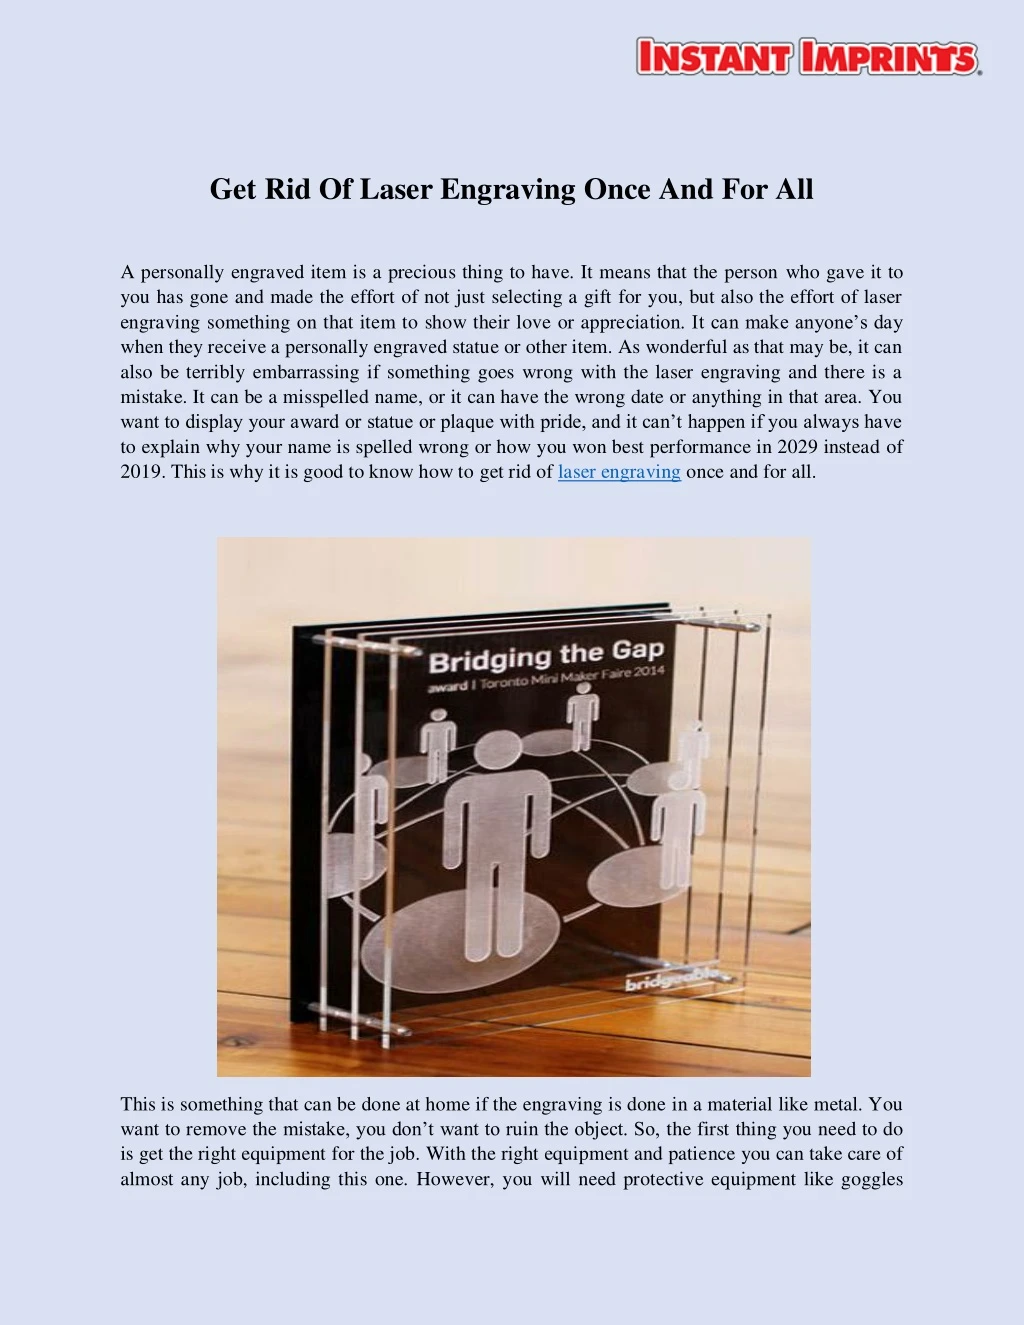 get rid of laser engraving once and for all